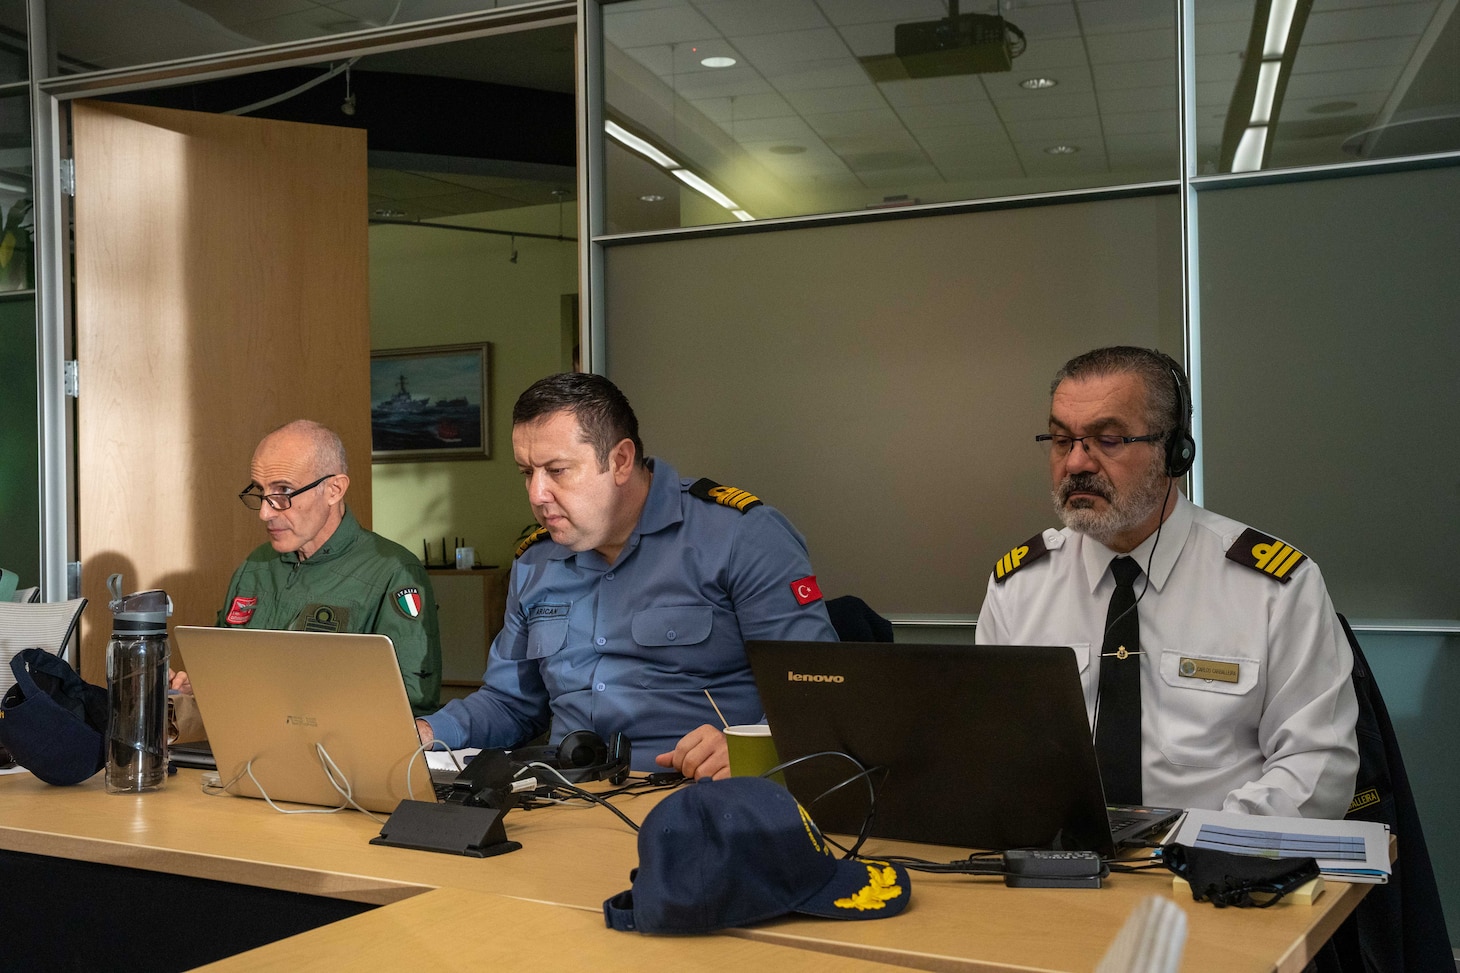 Italian Navy Capt. Giuseppe Catapano, left, Turkish Navy Cmdr. Emir Arican, center, and Spanish Navy Cmdr. Carlos Carballeira, right, listen to welcoming remarks from Vice Adm. Daniel Dwyer, director, Combined Joint Operations from the Sea, Centre of Excellence (CJOS COE), during the 6th annual Maritime Security Regimes Round Table.